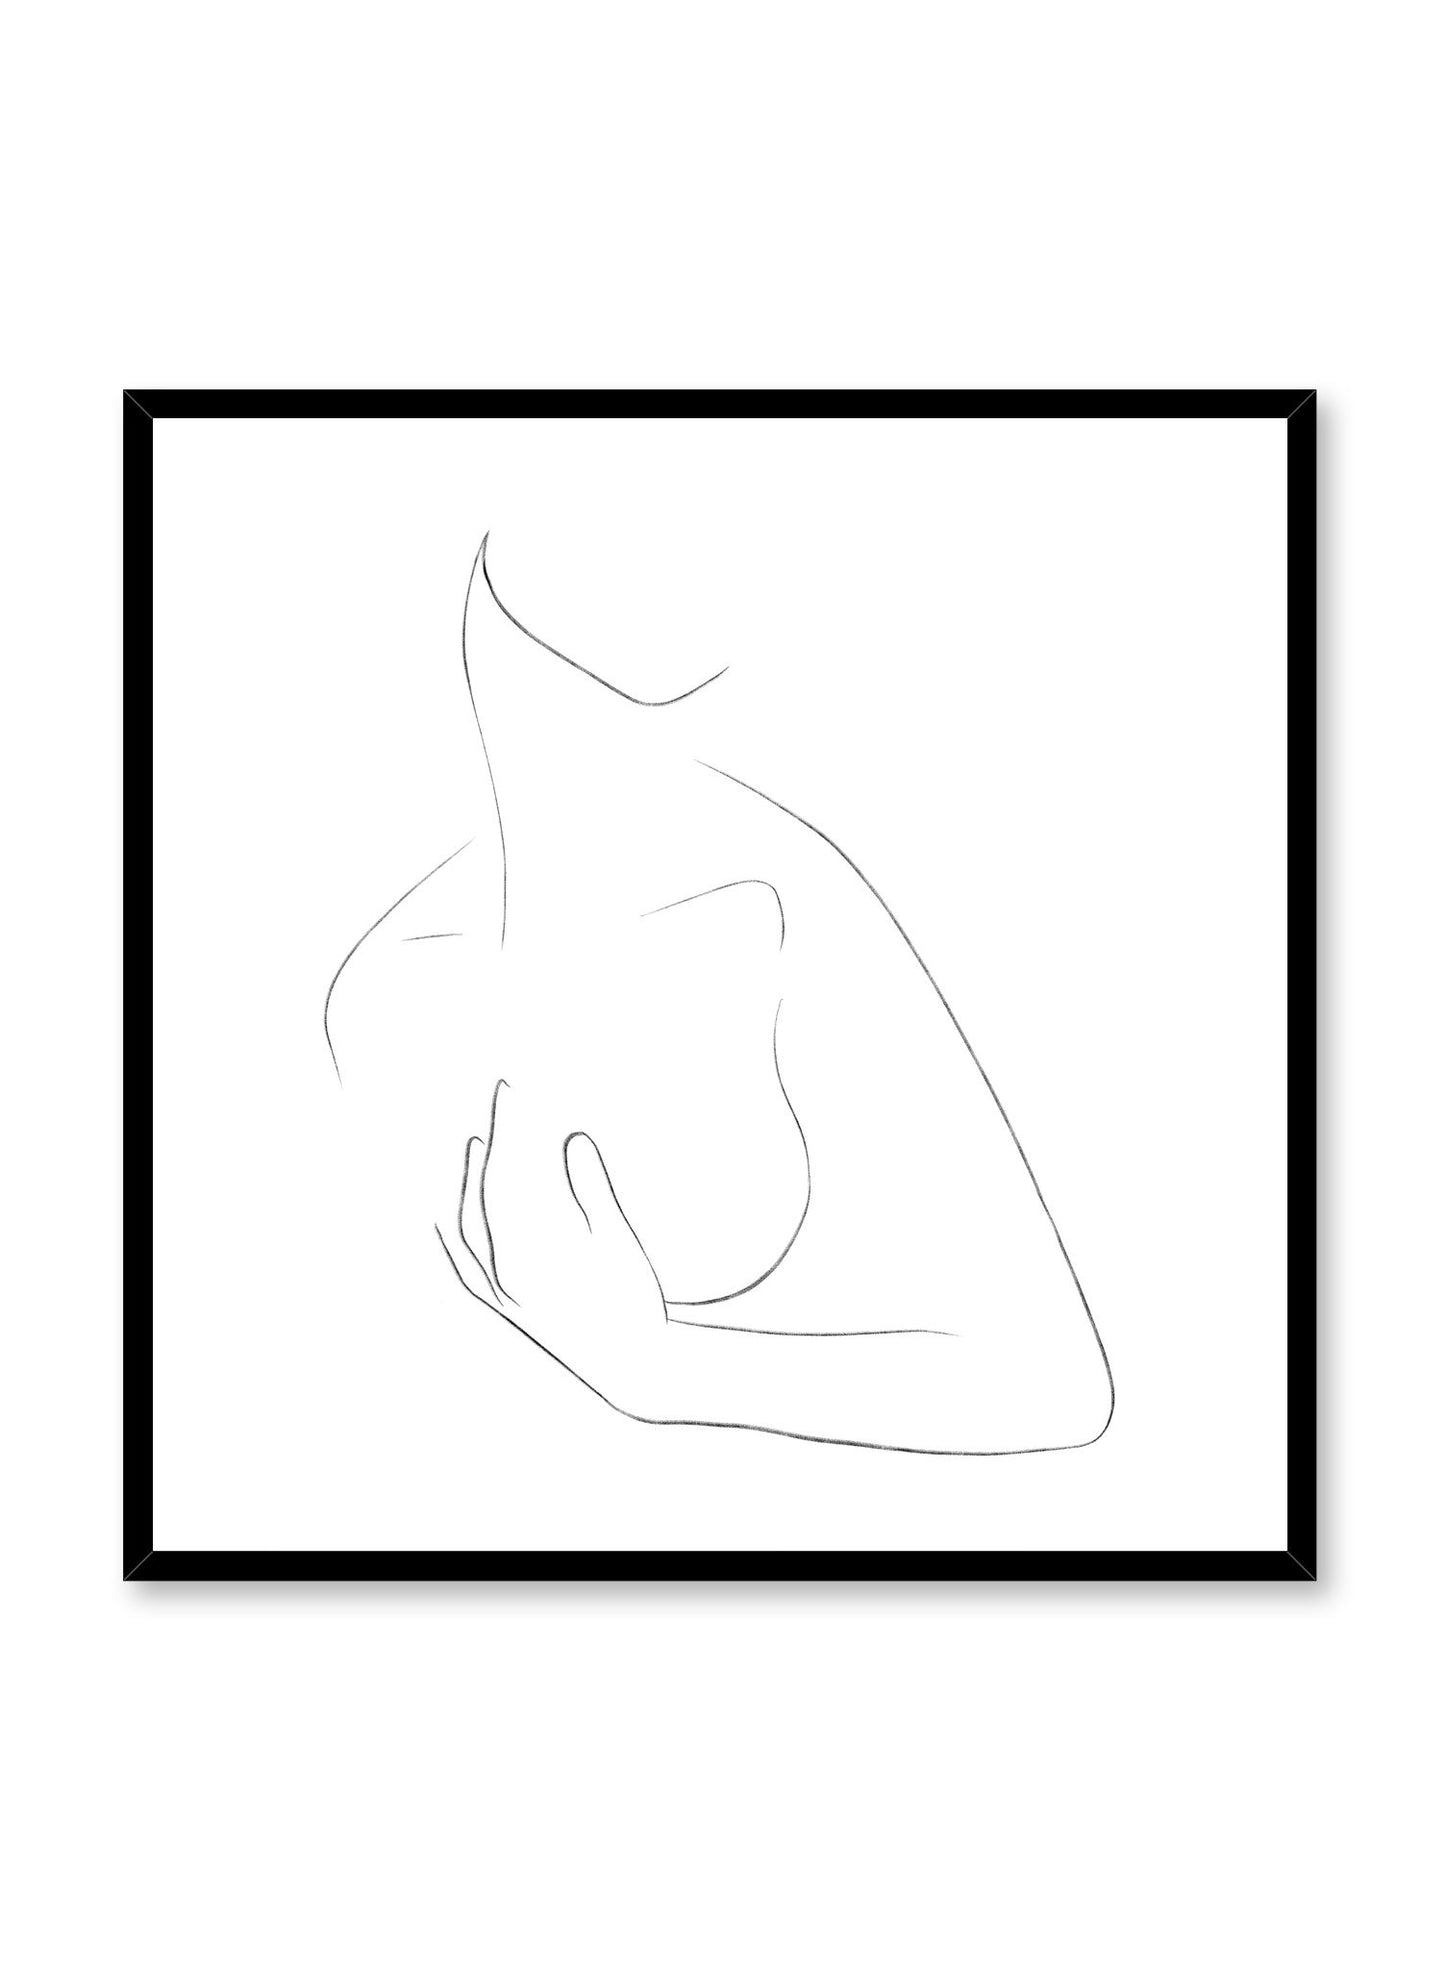 Modern minimalist delicate line art poster by Opposite Wall - Touch in square format